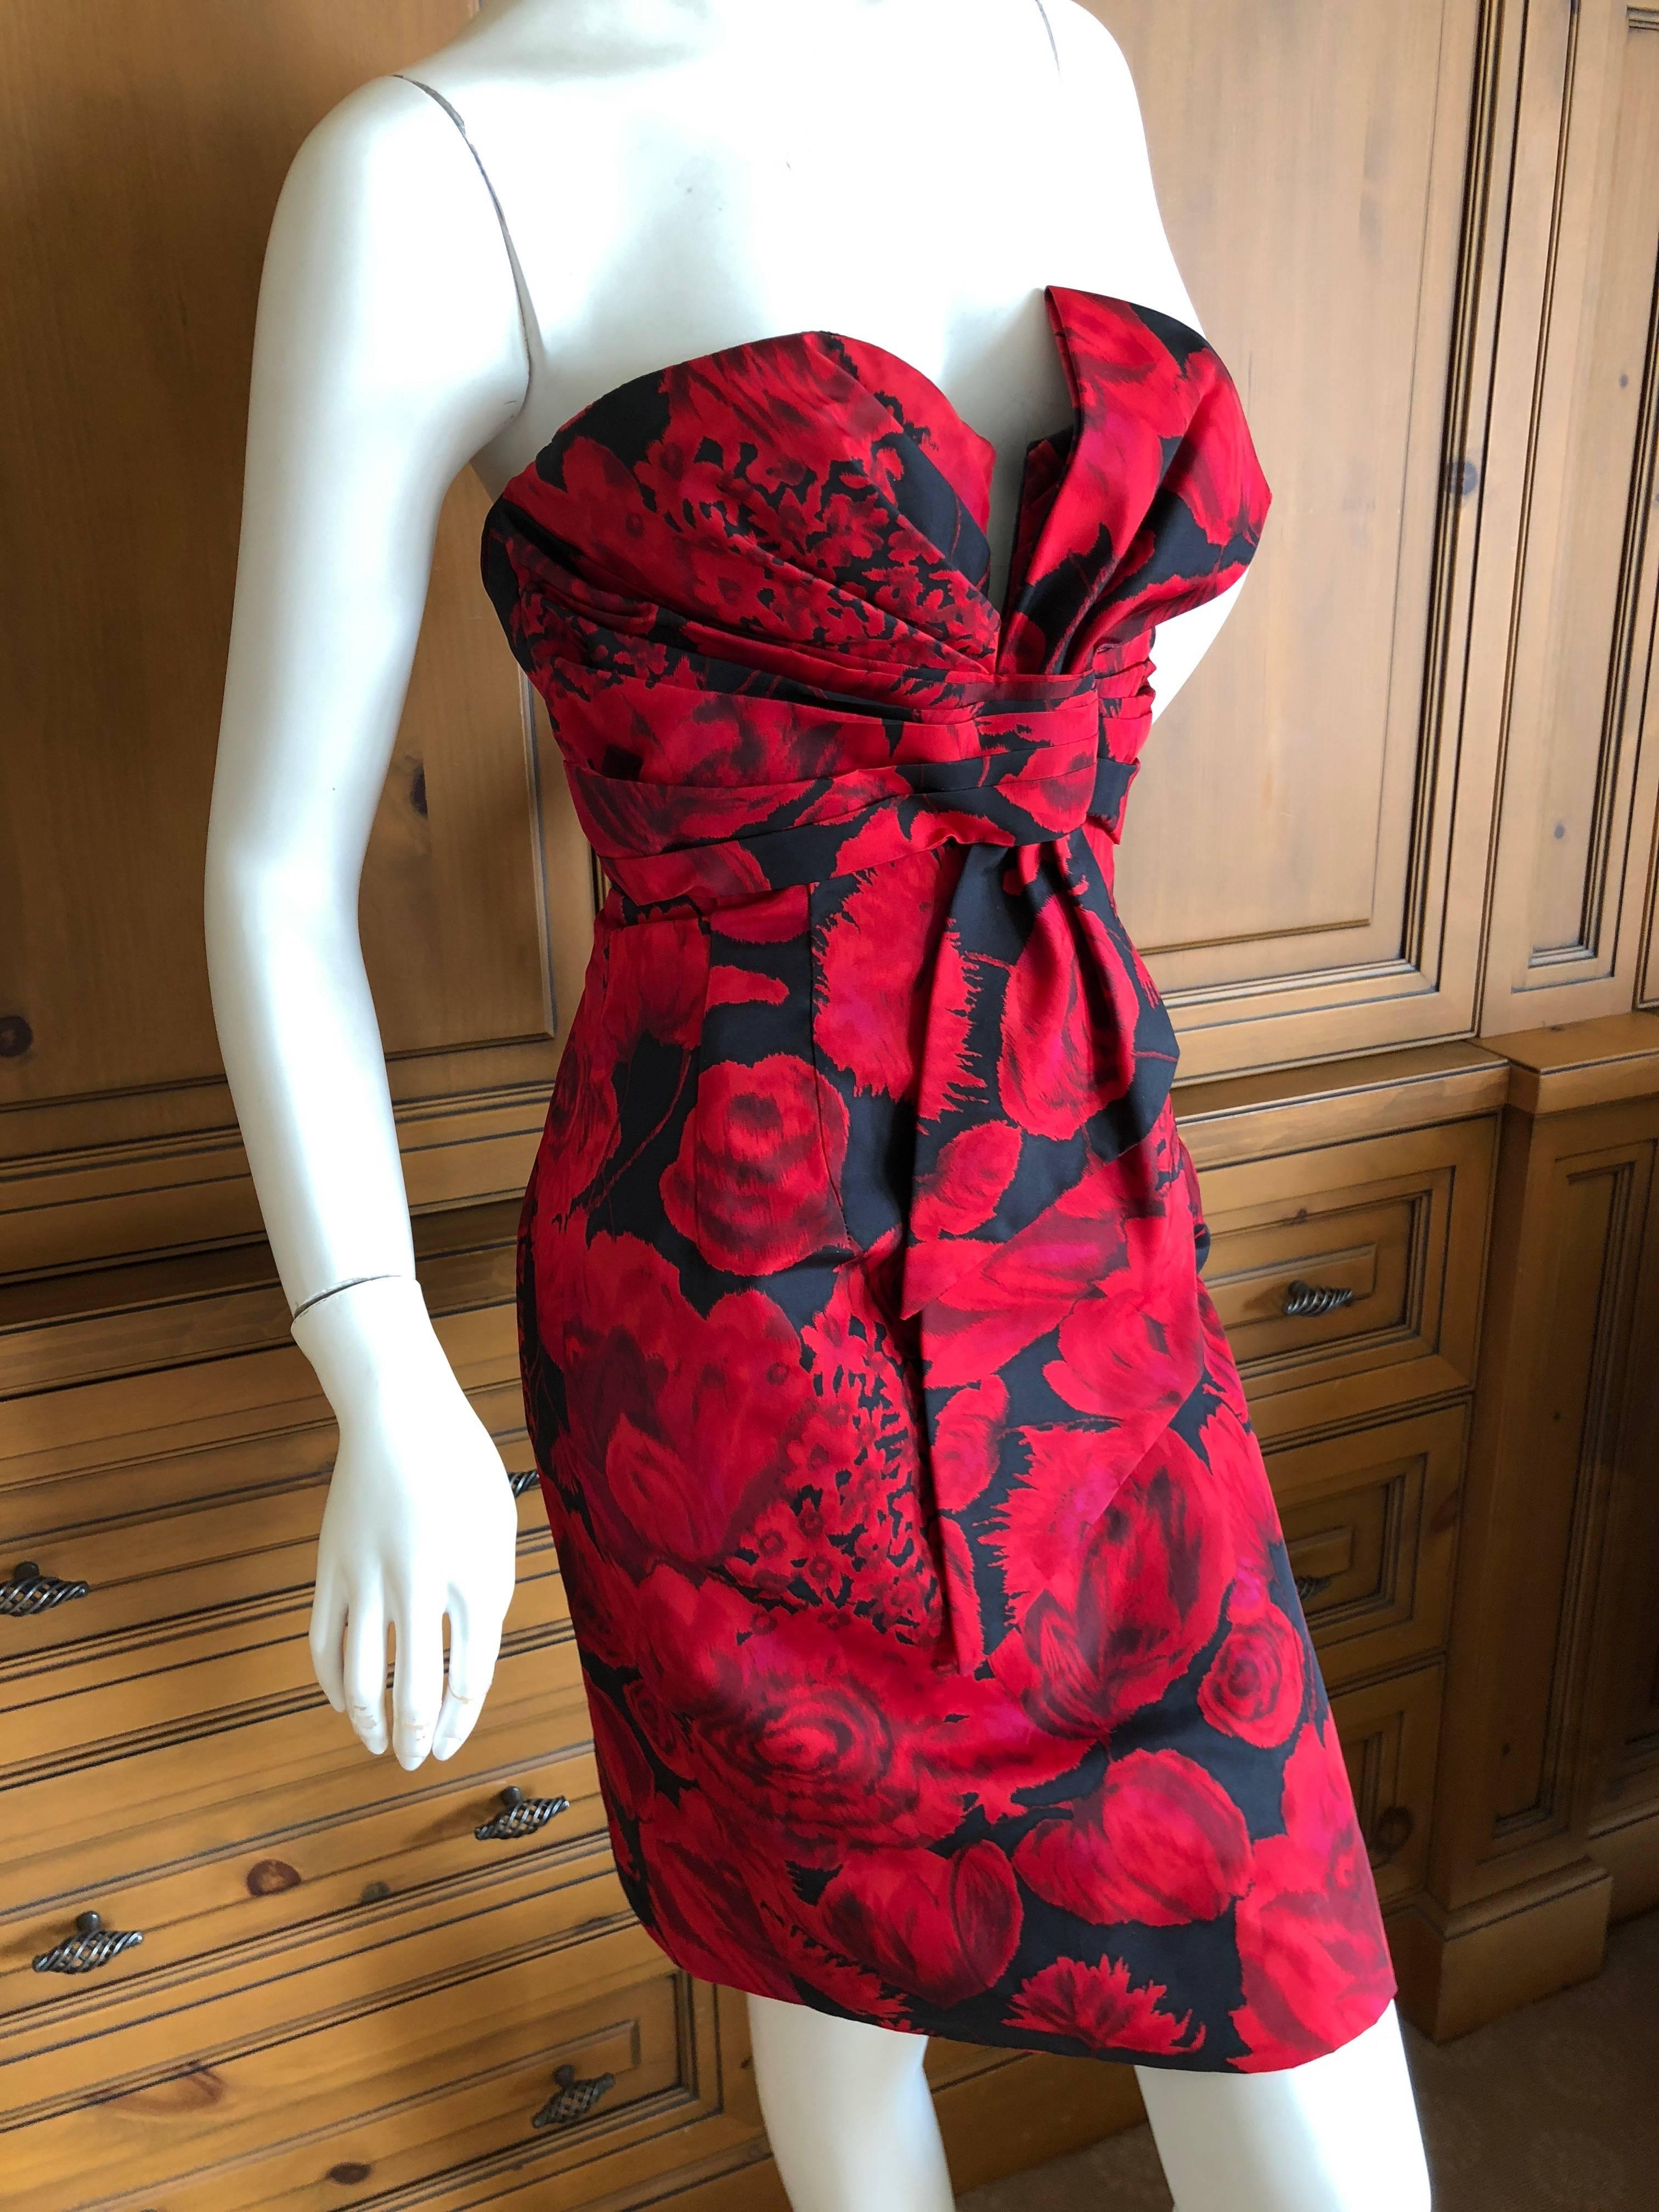 Women's Christian Dior by John Galliano Red Floral Strapless Dress, Pre Fall 2009 